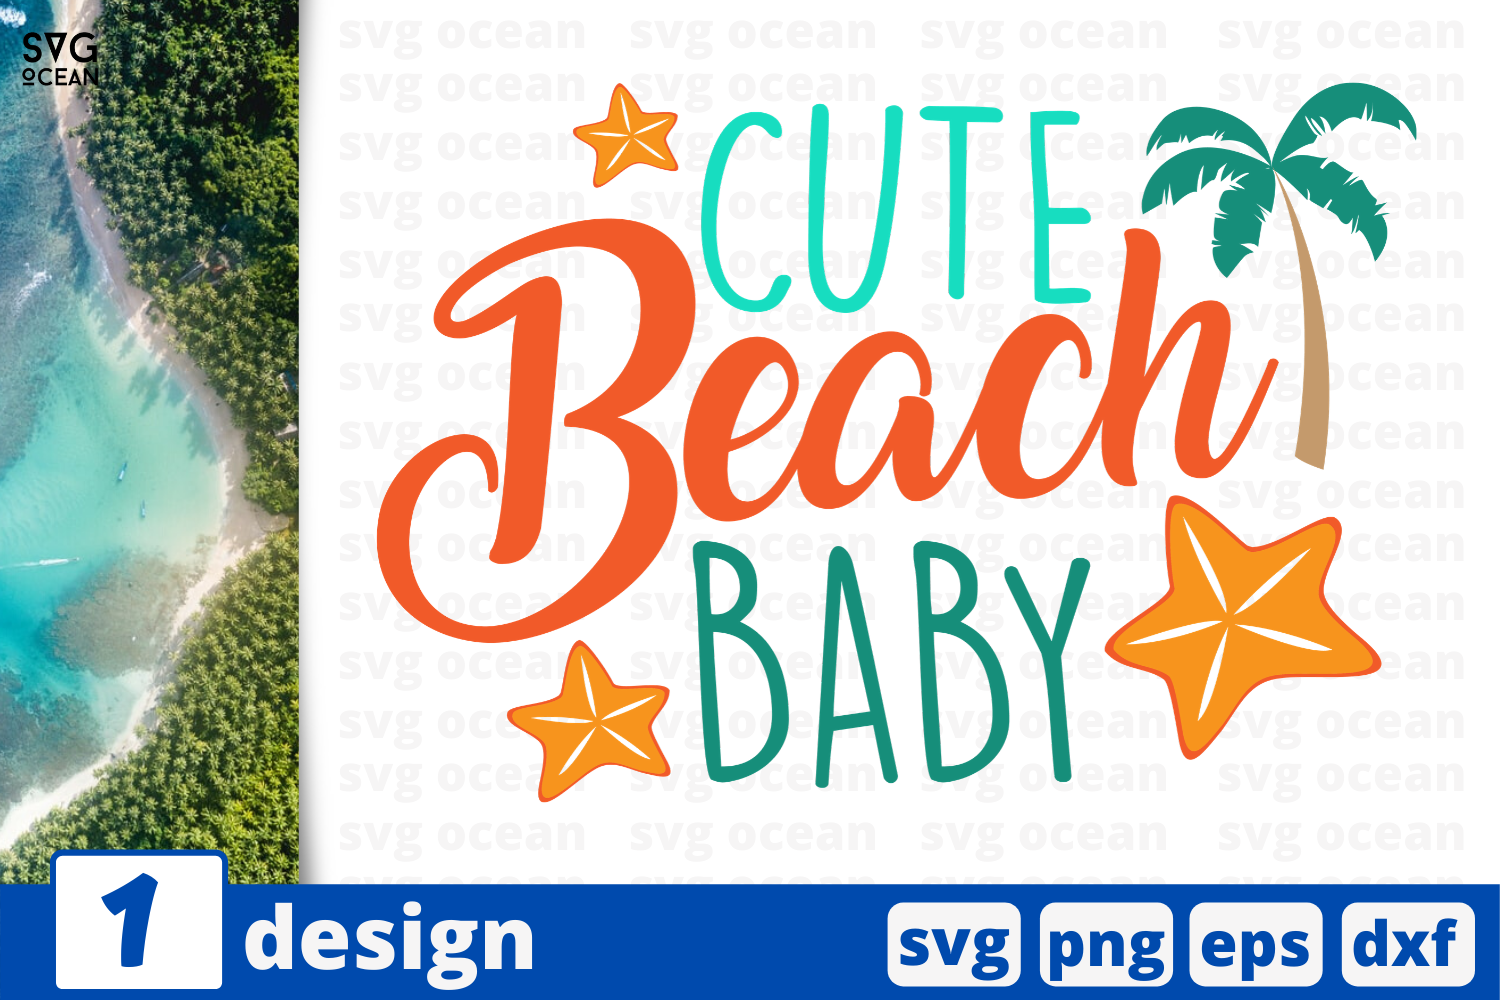 Download 1 Cute Beach Baby Svg Bundle Quotes Cricut Svg By Svgocean Thehungryjpeg Com